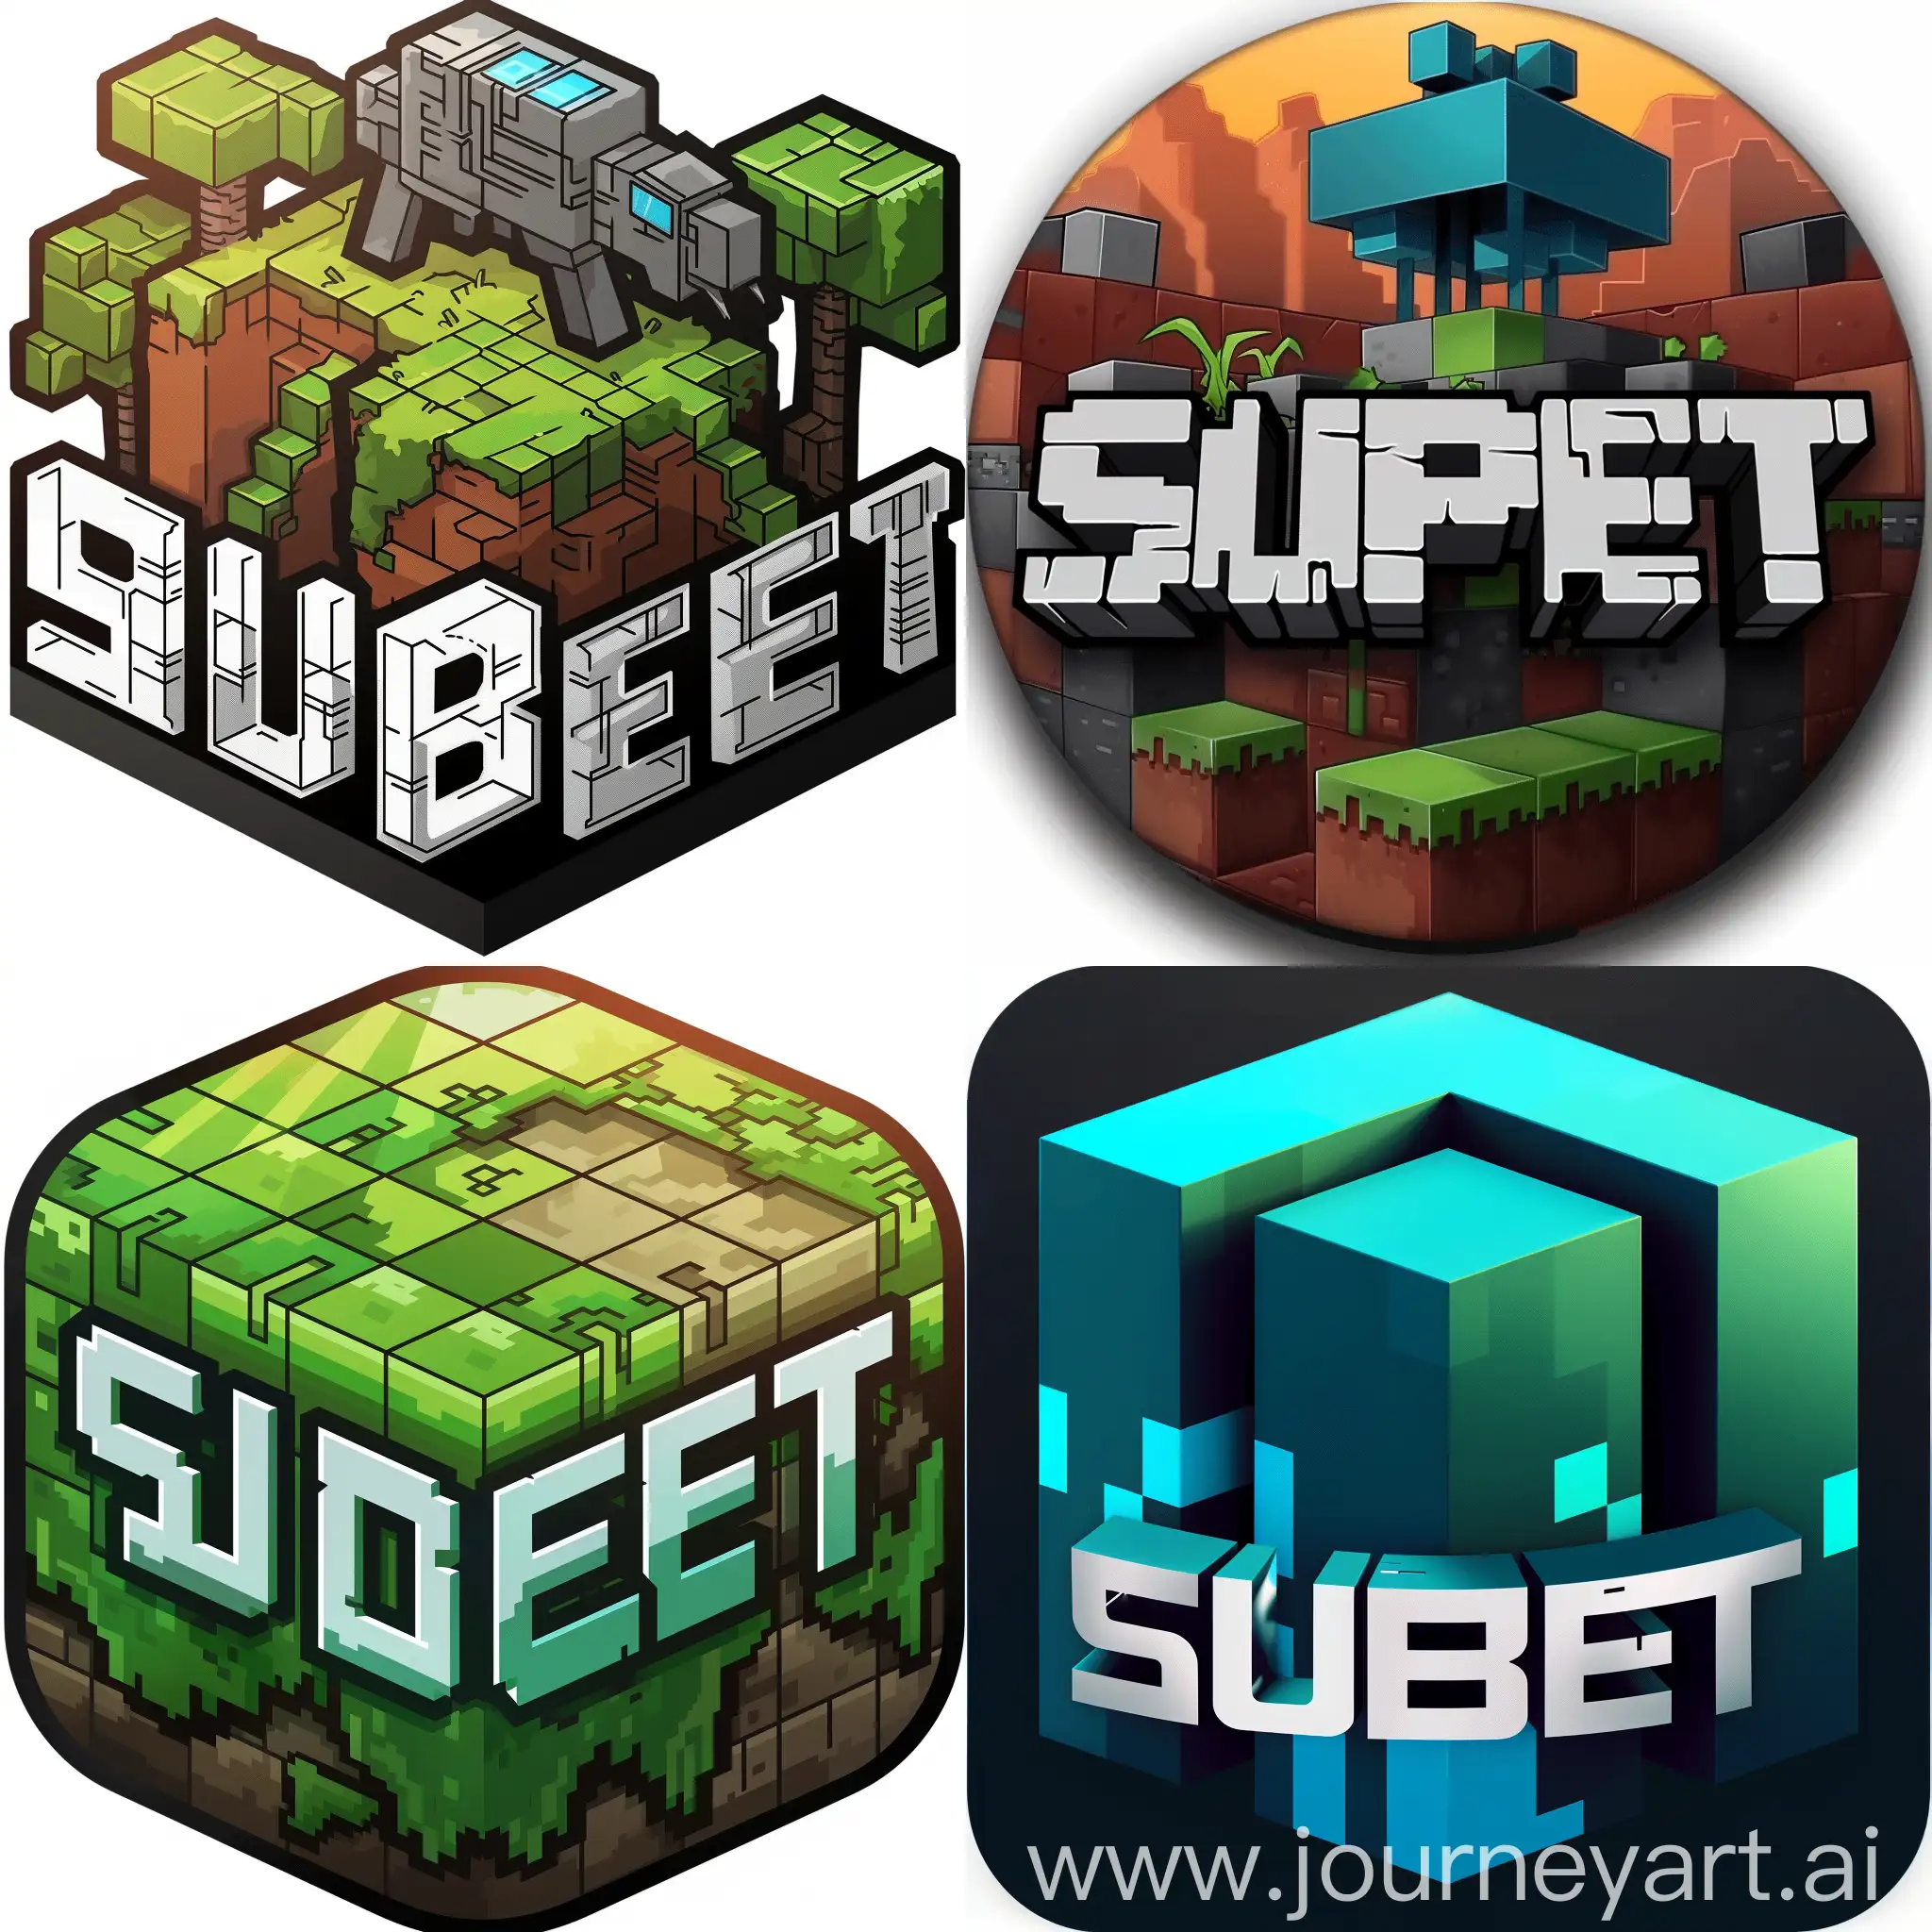 The logo of  "subnet", an online platform where seniors of a university advice juniors on concepts like programming, development, AI, electronics, etc.  in the style of minecraft.